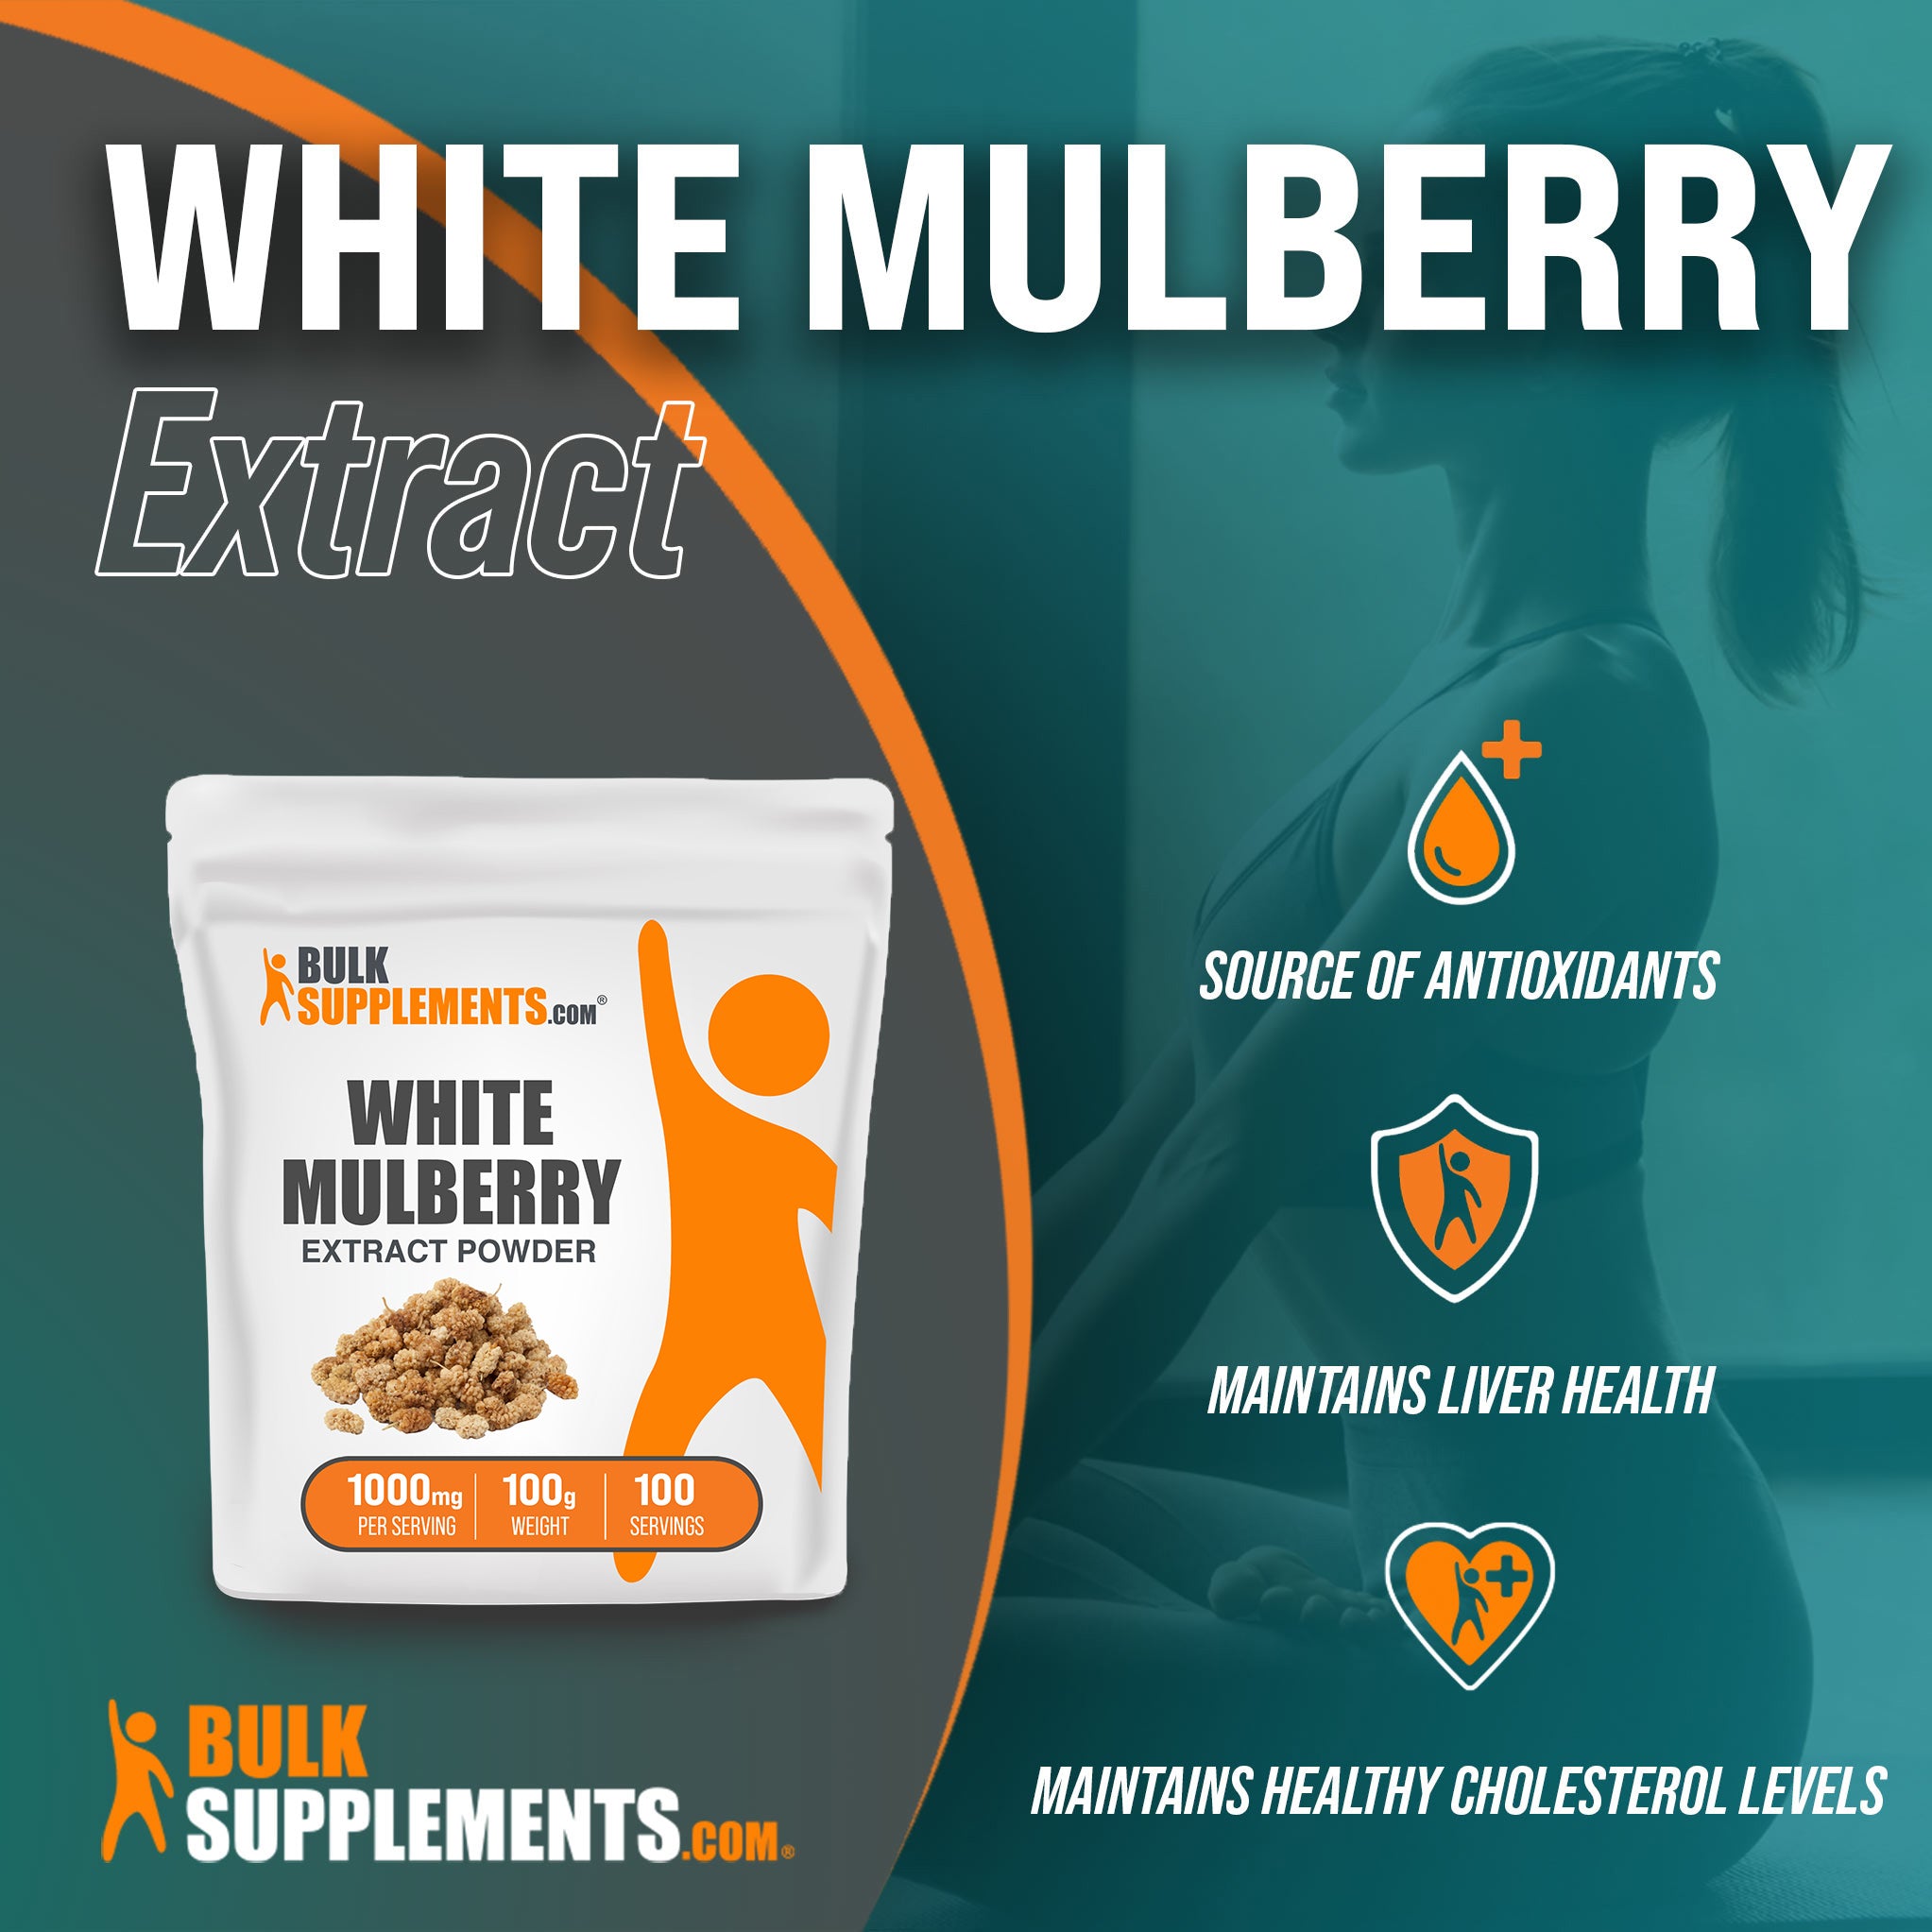 Benefits of White Mulberry Extract: source of antioxidants, maintains liver health, maintains healthy cholesterol levels